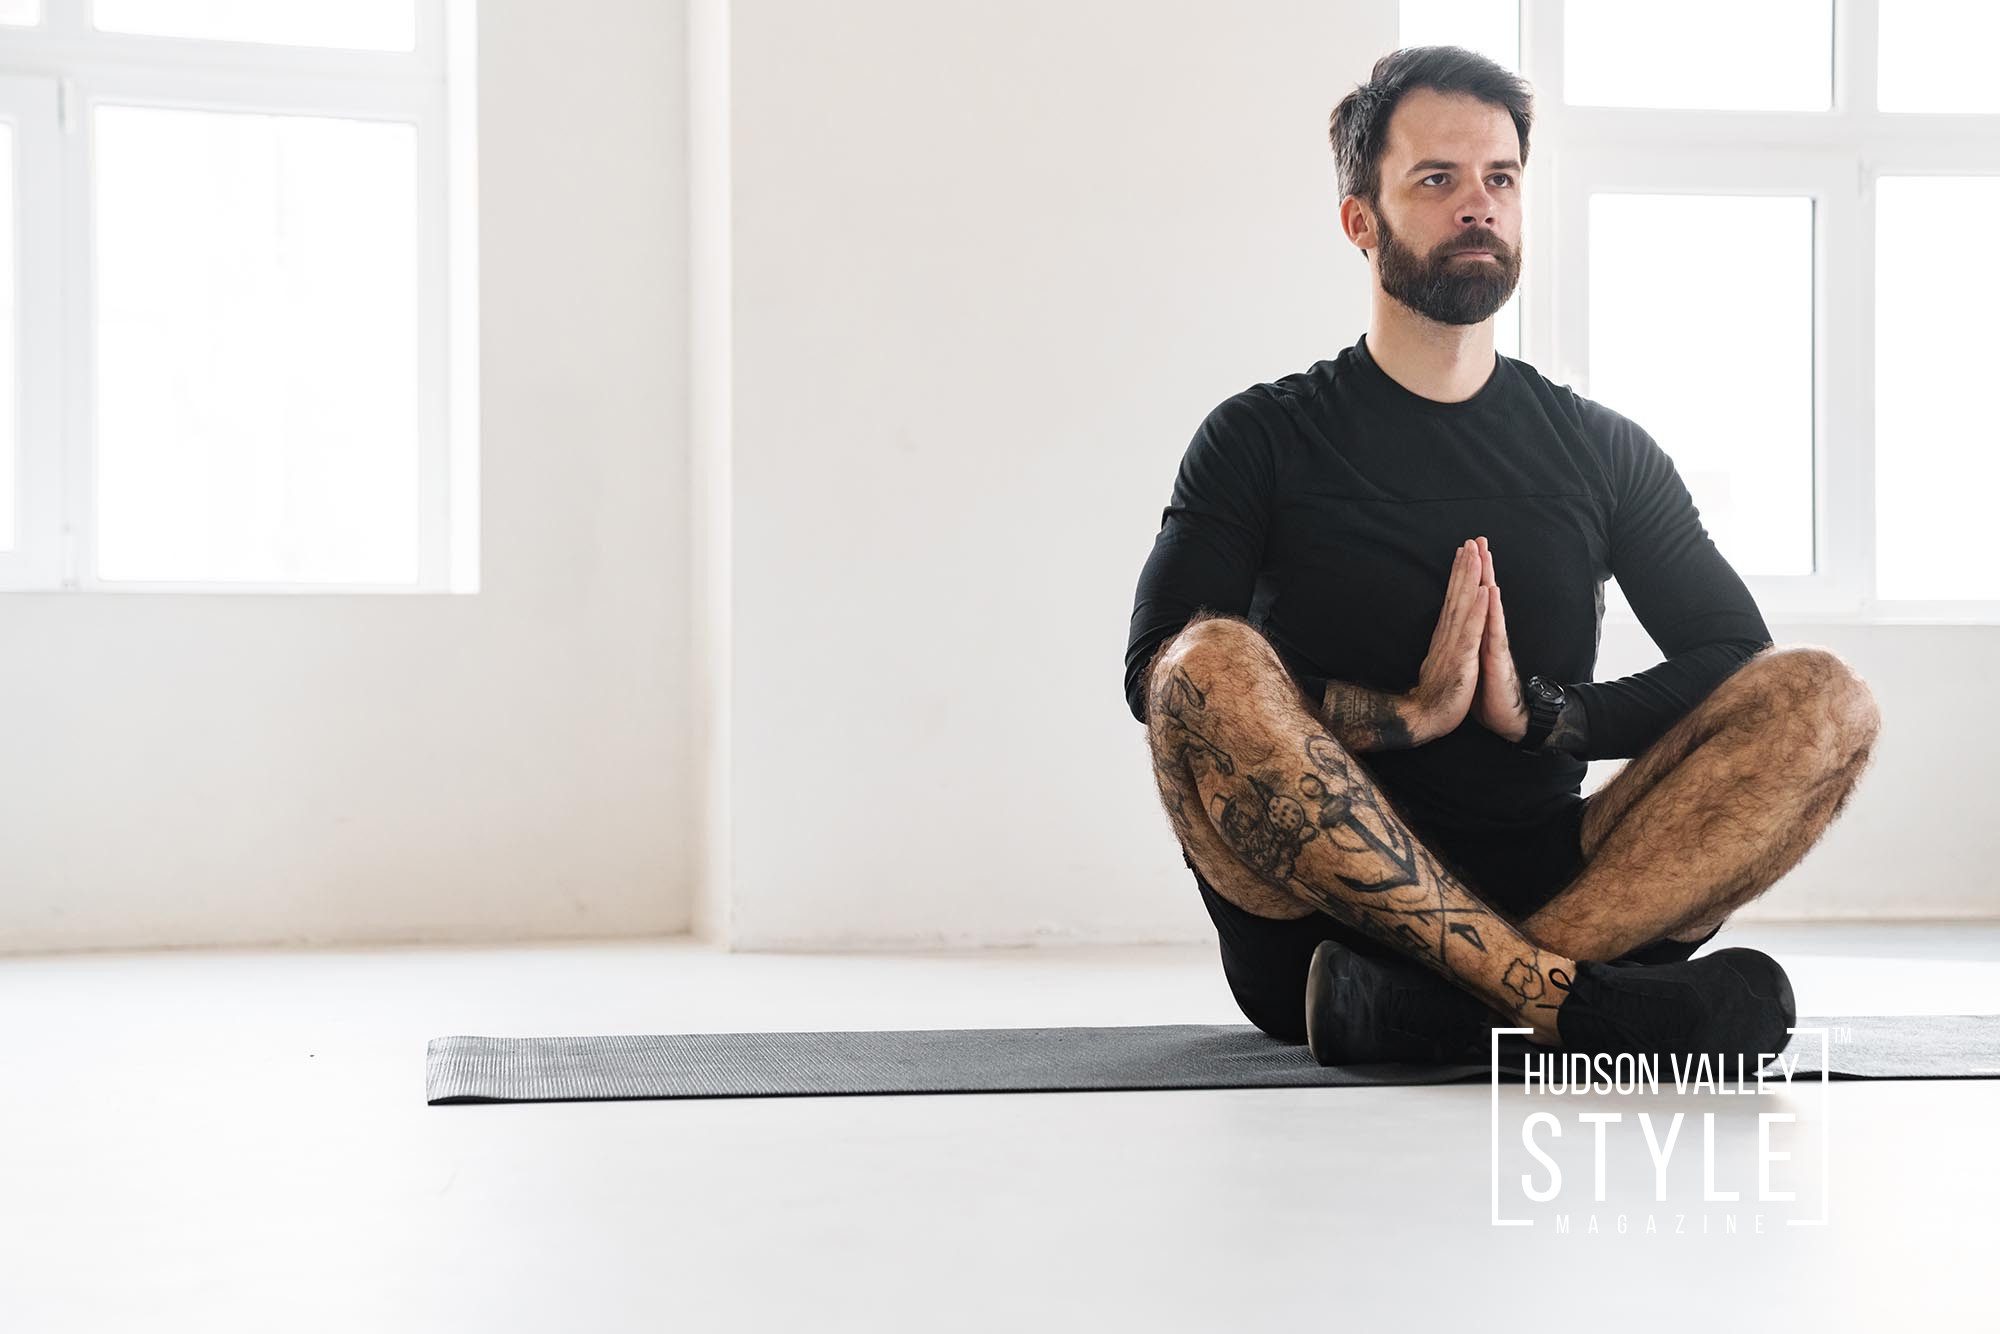 3 Easy Yoga Poses for Beginners: A Gentle Introduction to the Practice – Yoga for Men 101 with Coach Maxwell Alexander